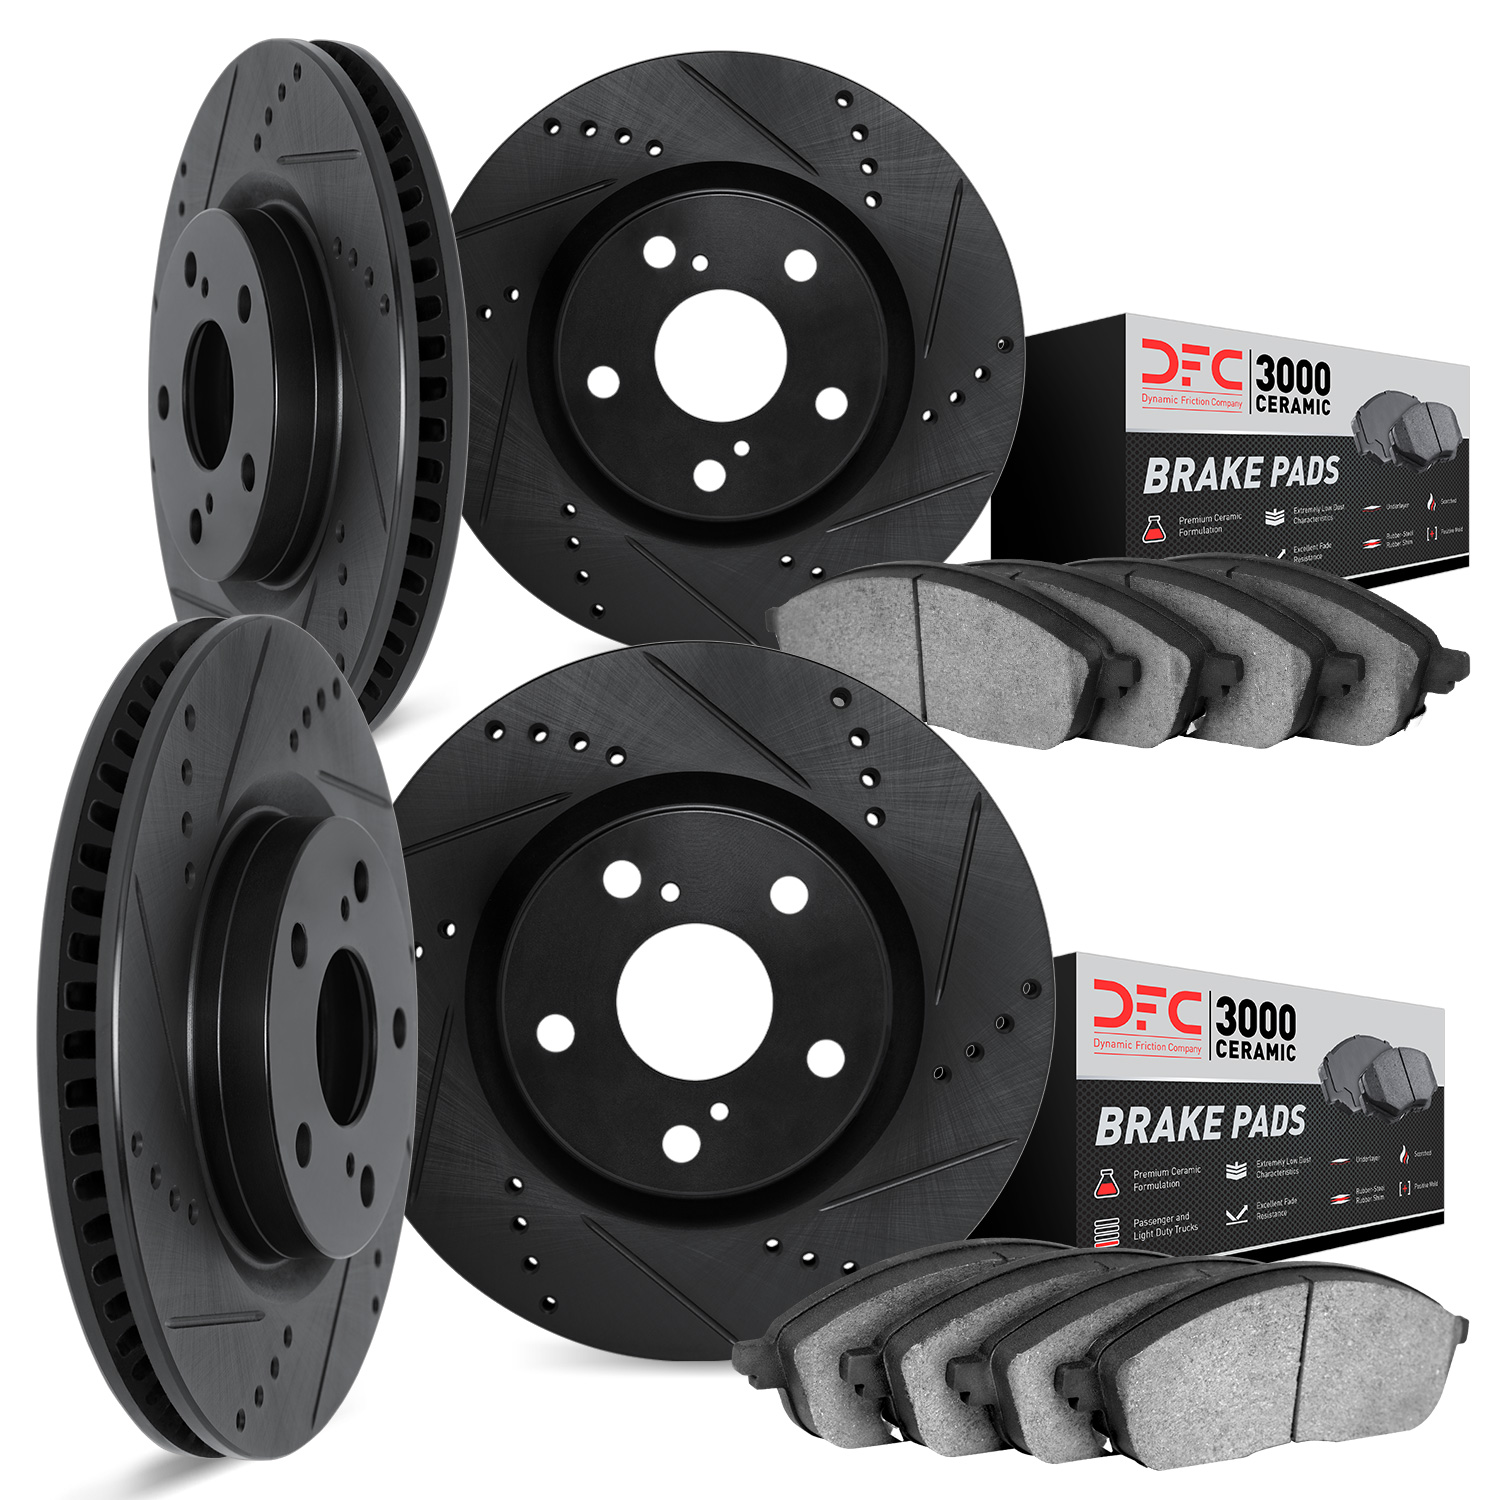 8304-31073 Drilled/Slotted Brake Rotors with 3000-Series Ceramic Brake Pads Kit [Black], 2008-2019 BMW, Position: Front and Rear